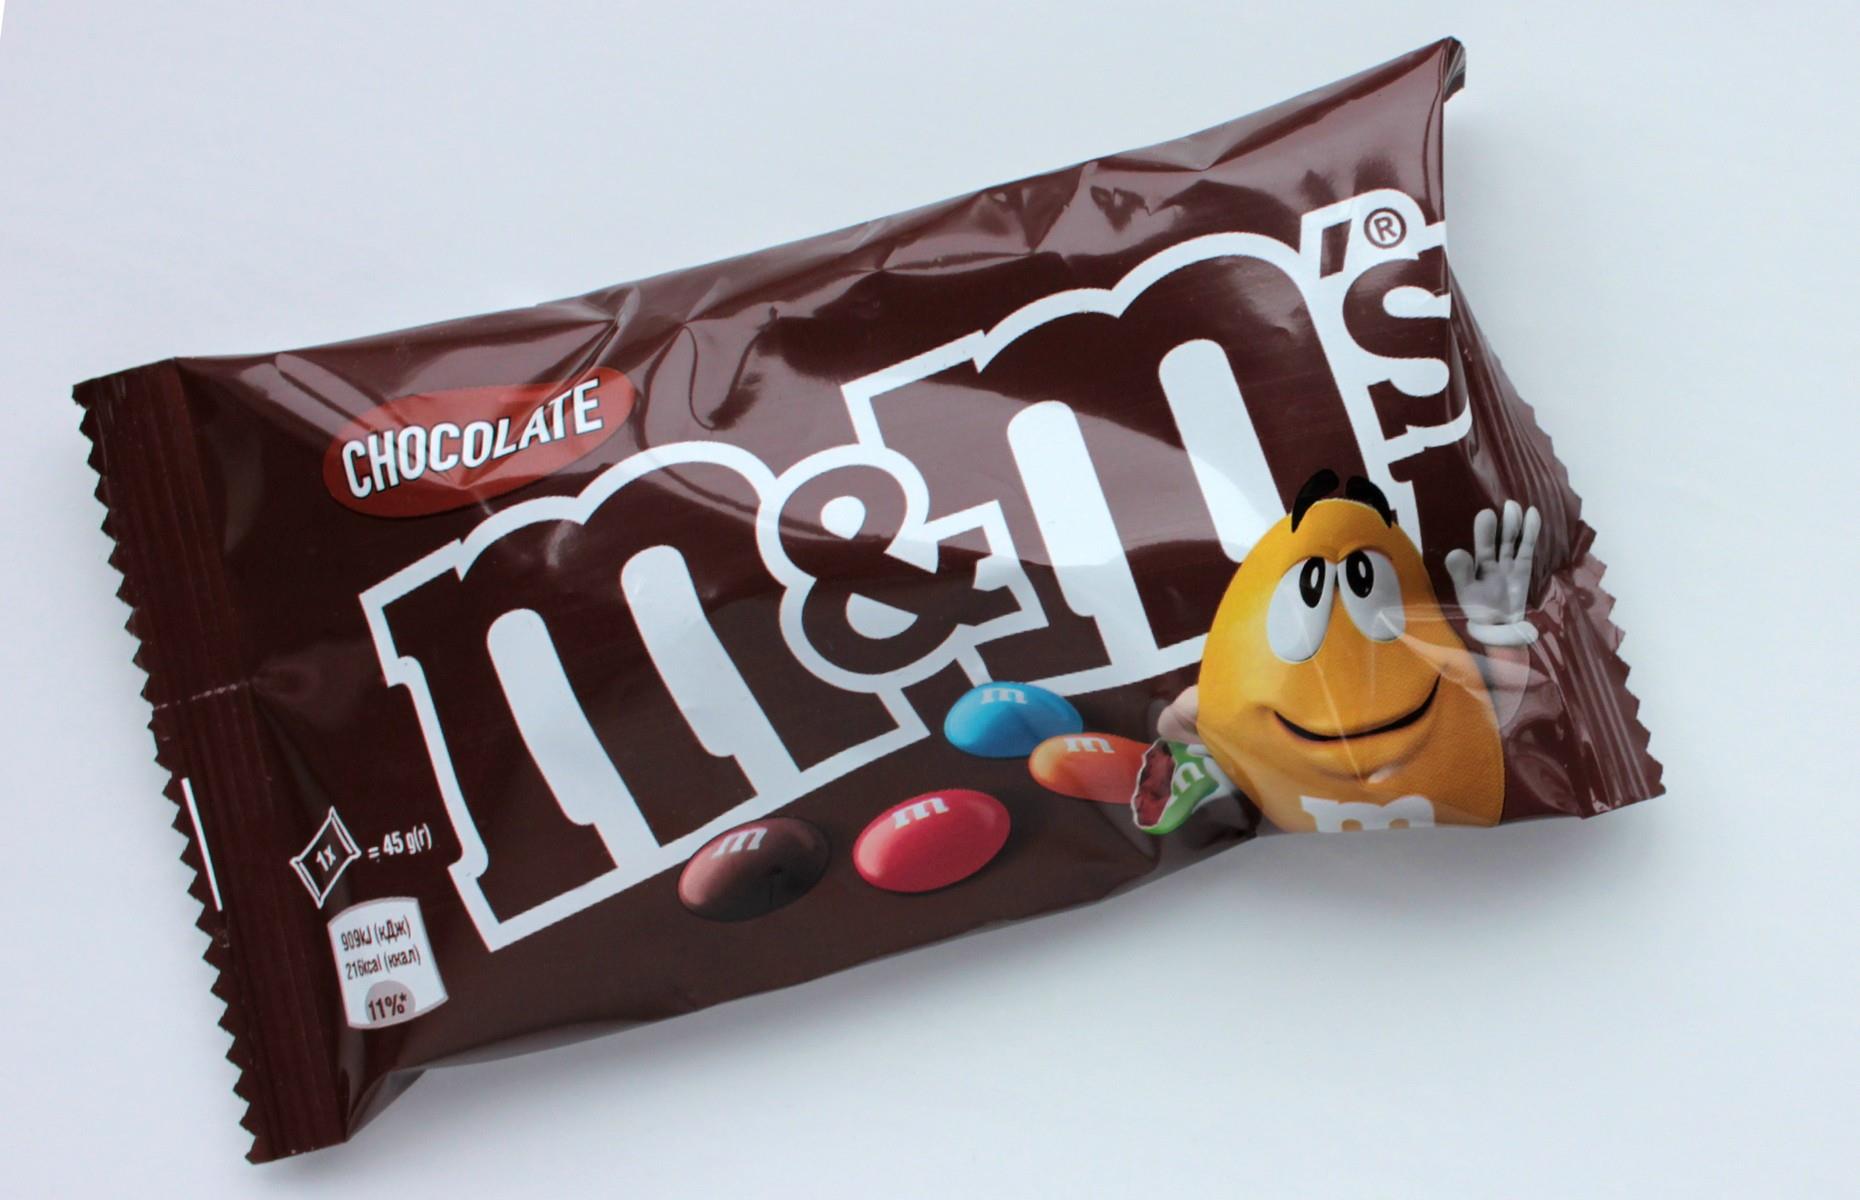 28 Sweet Facts You Didn't Know About M&Ms